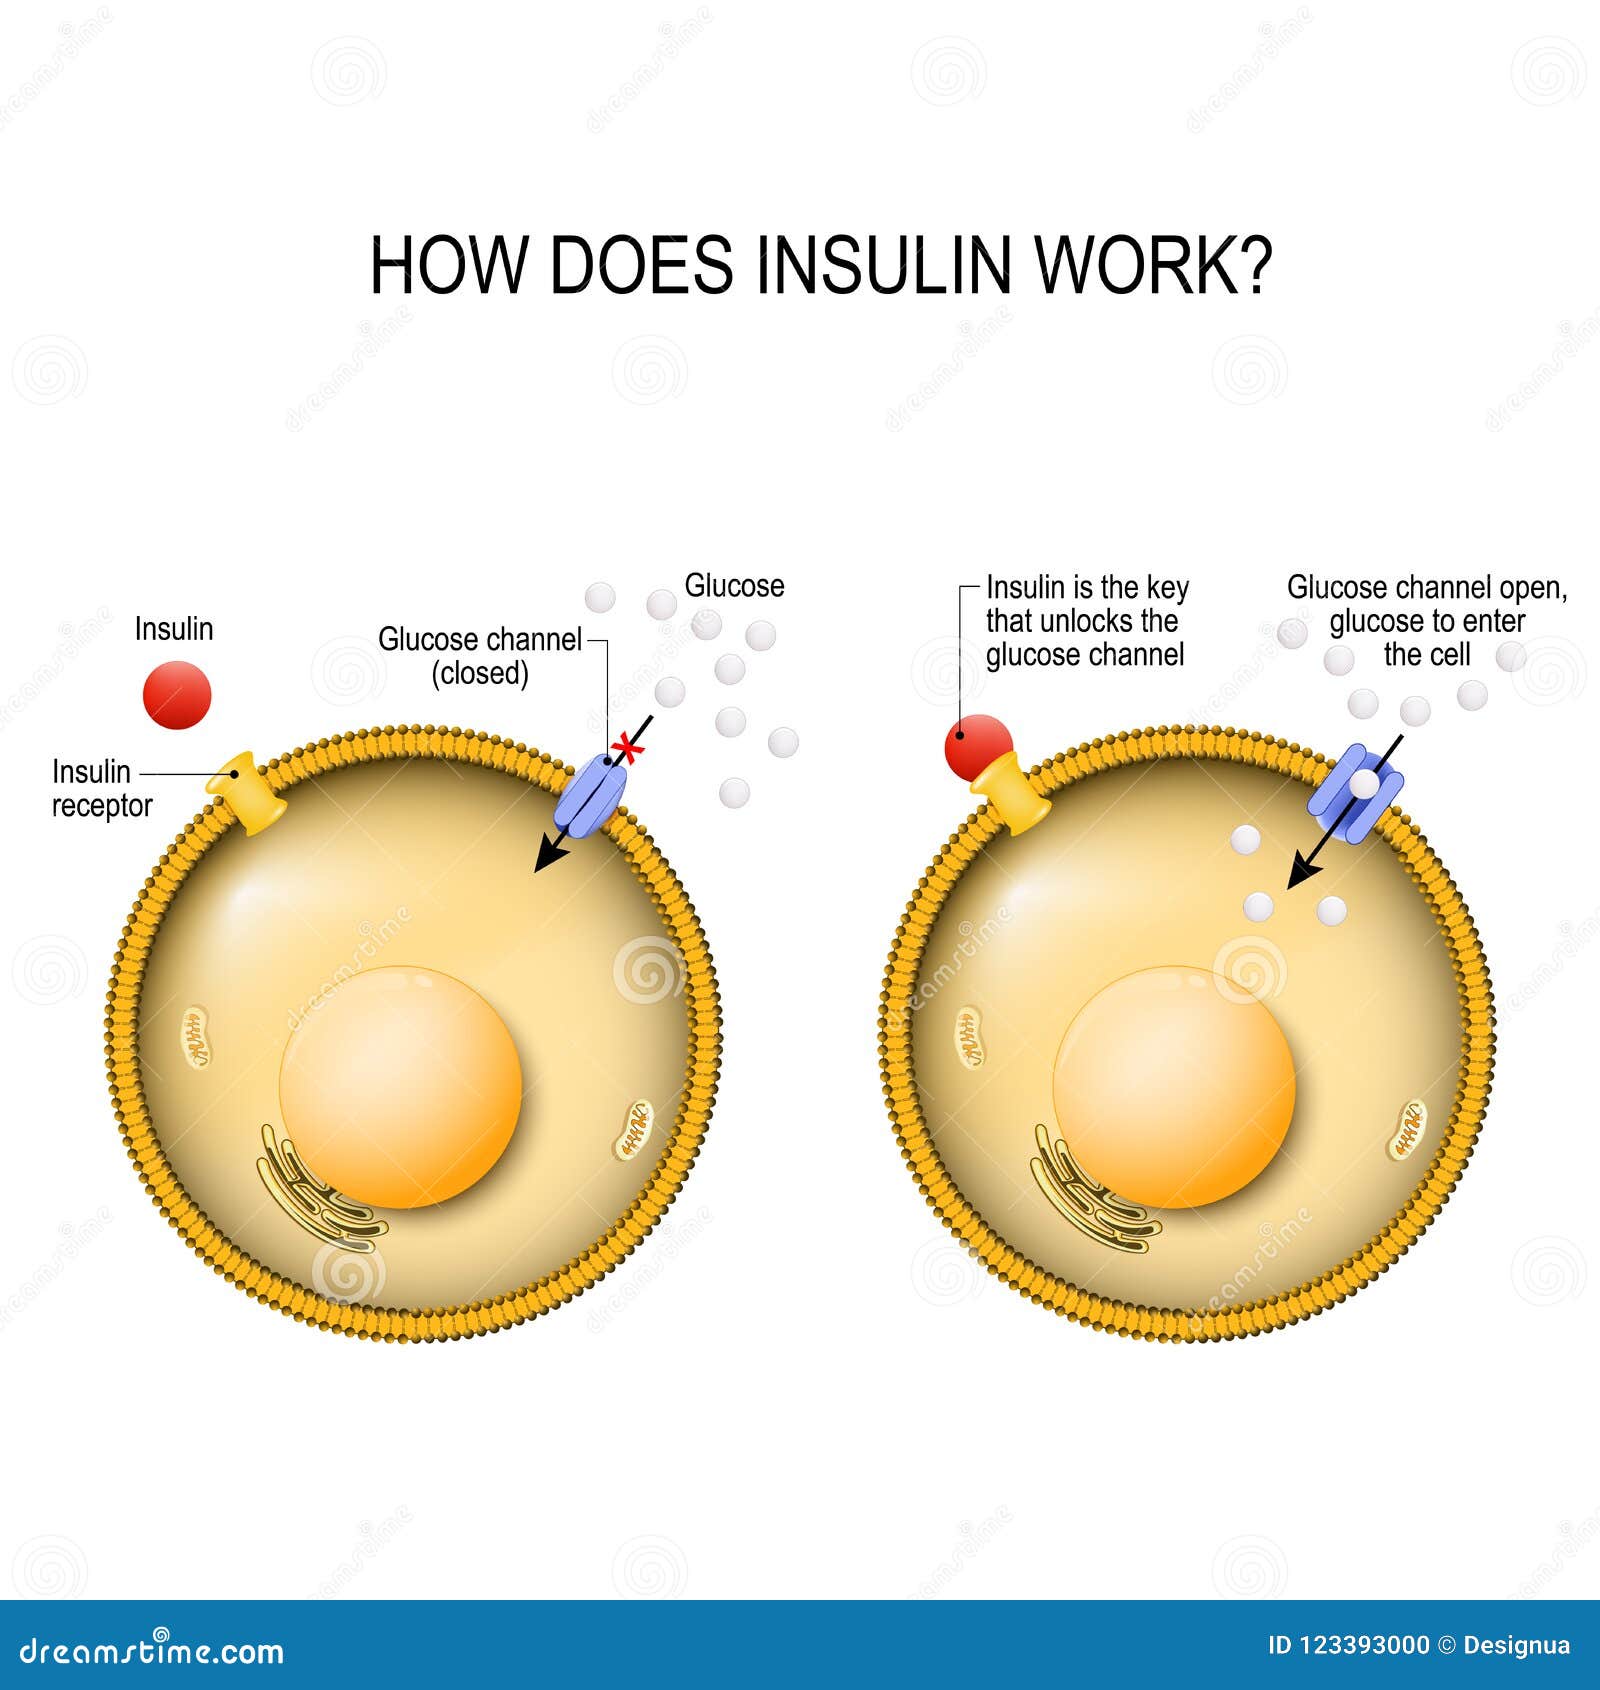 insulin is the key that unlocks the cells glucose channel